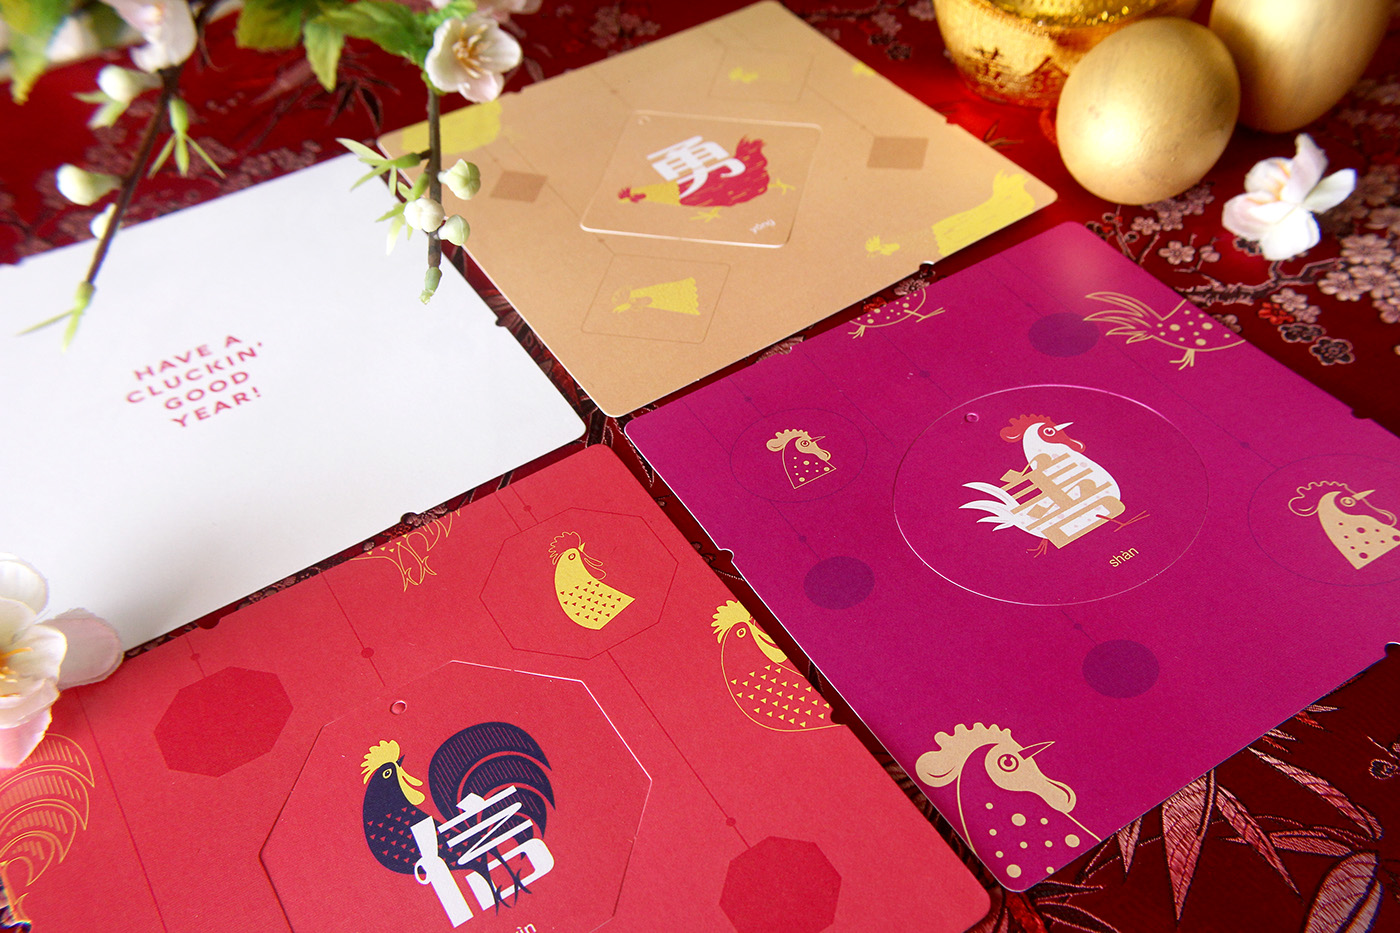 cny card red chinese new year Year of Rooster mail Lunar New Year festive